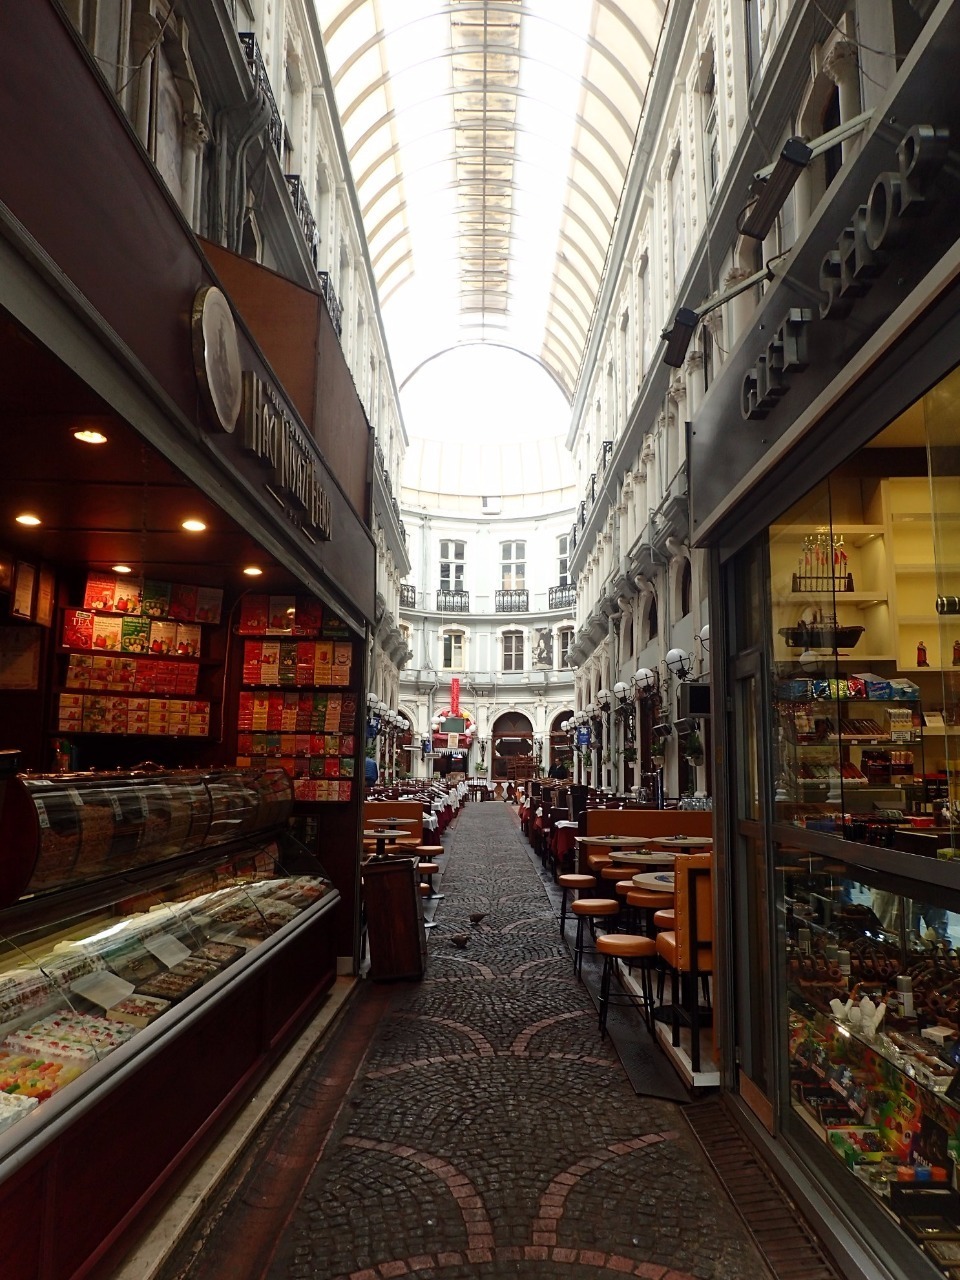 Shopping Arcade in New City